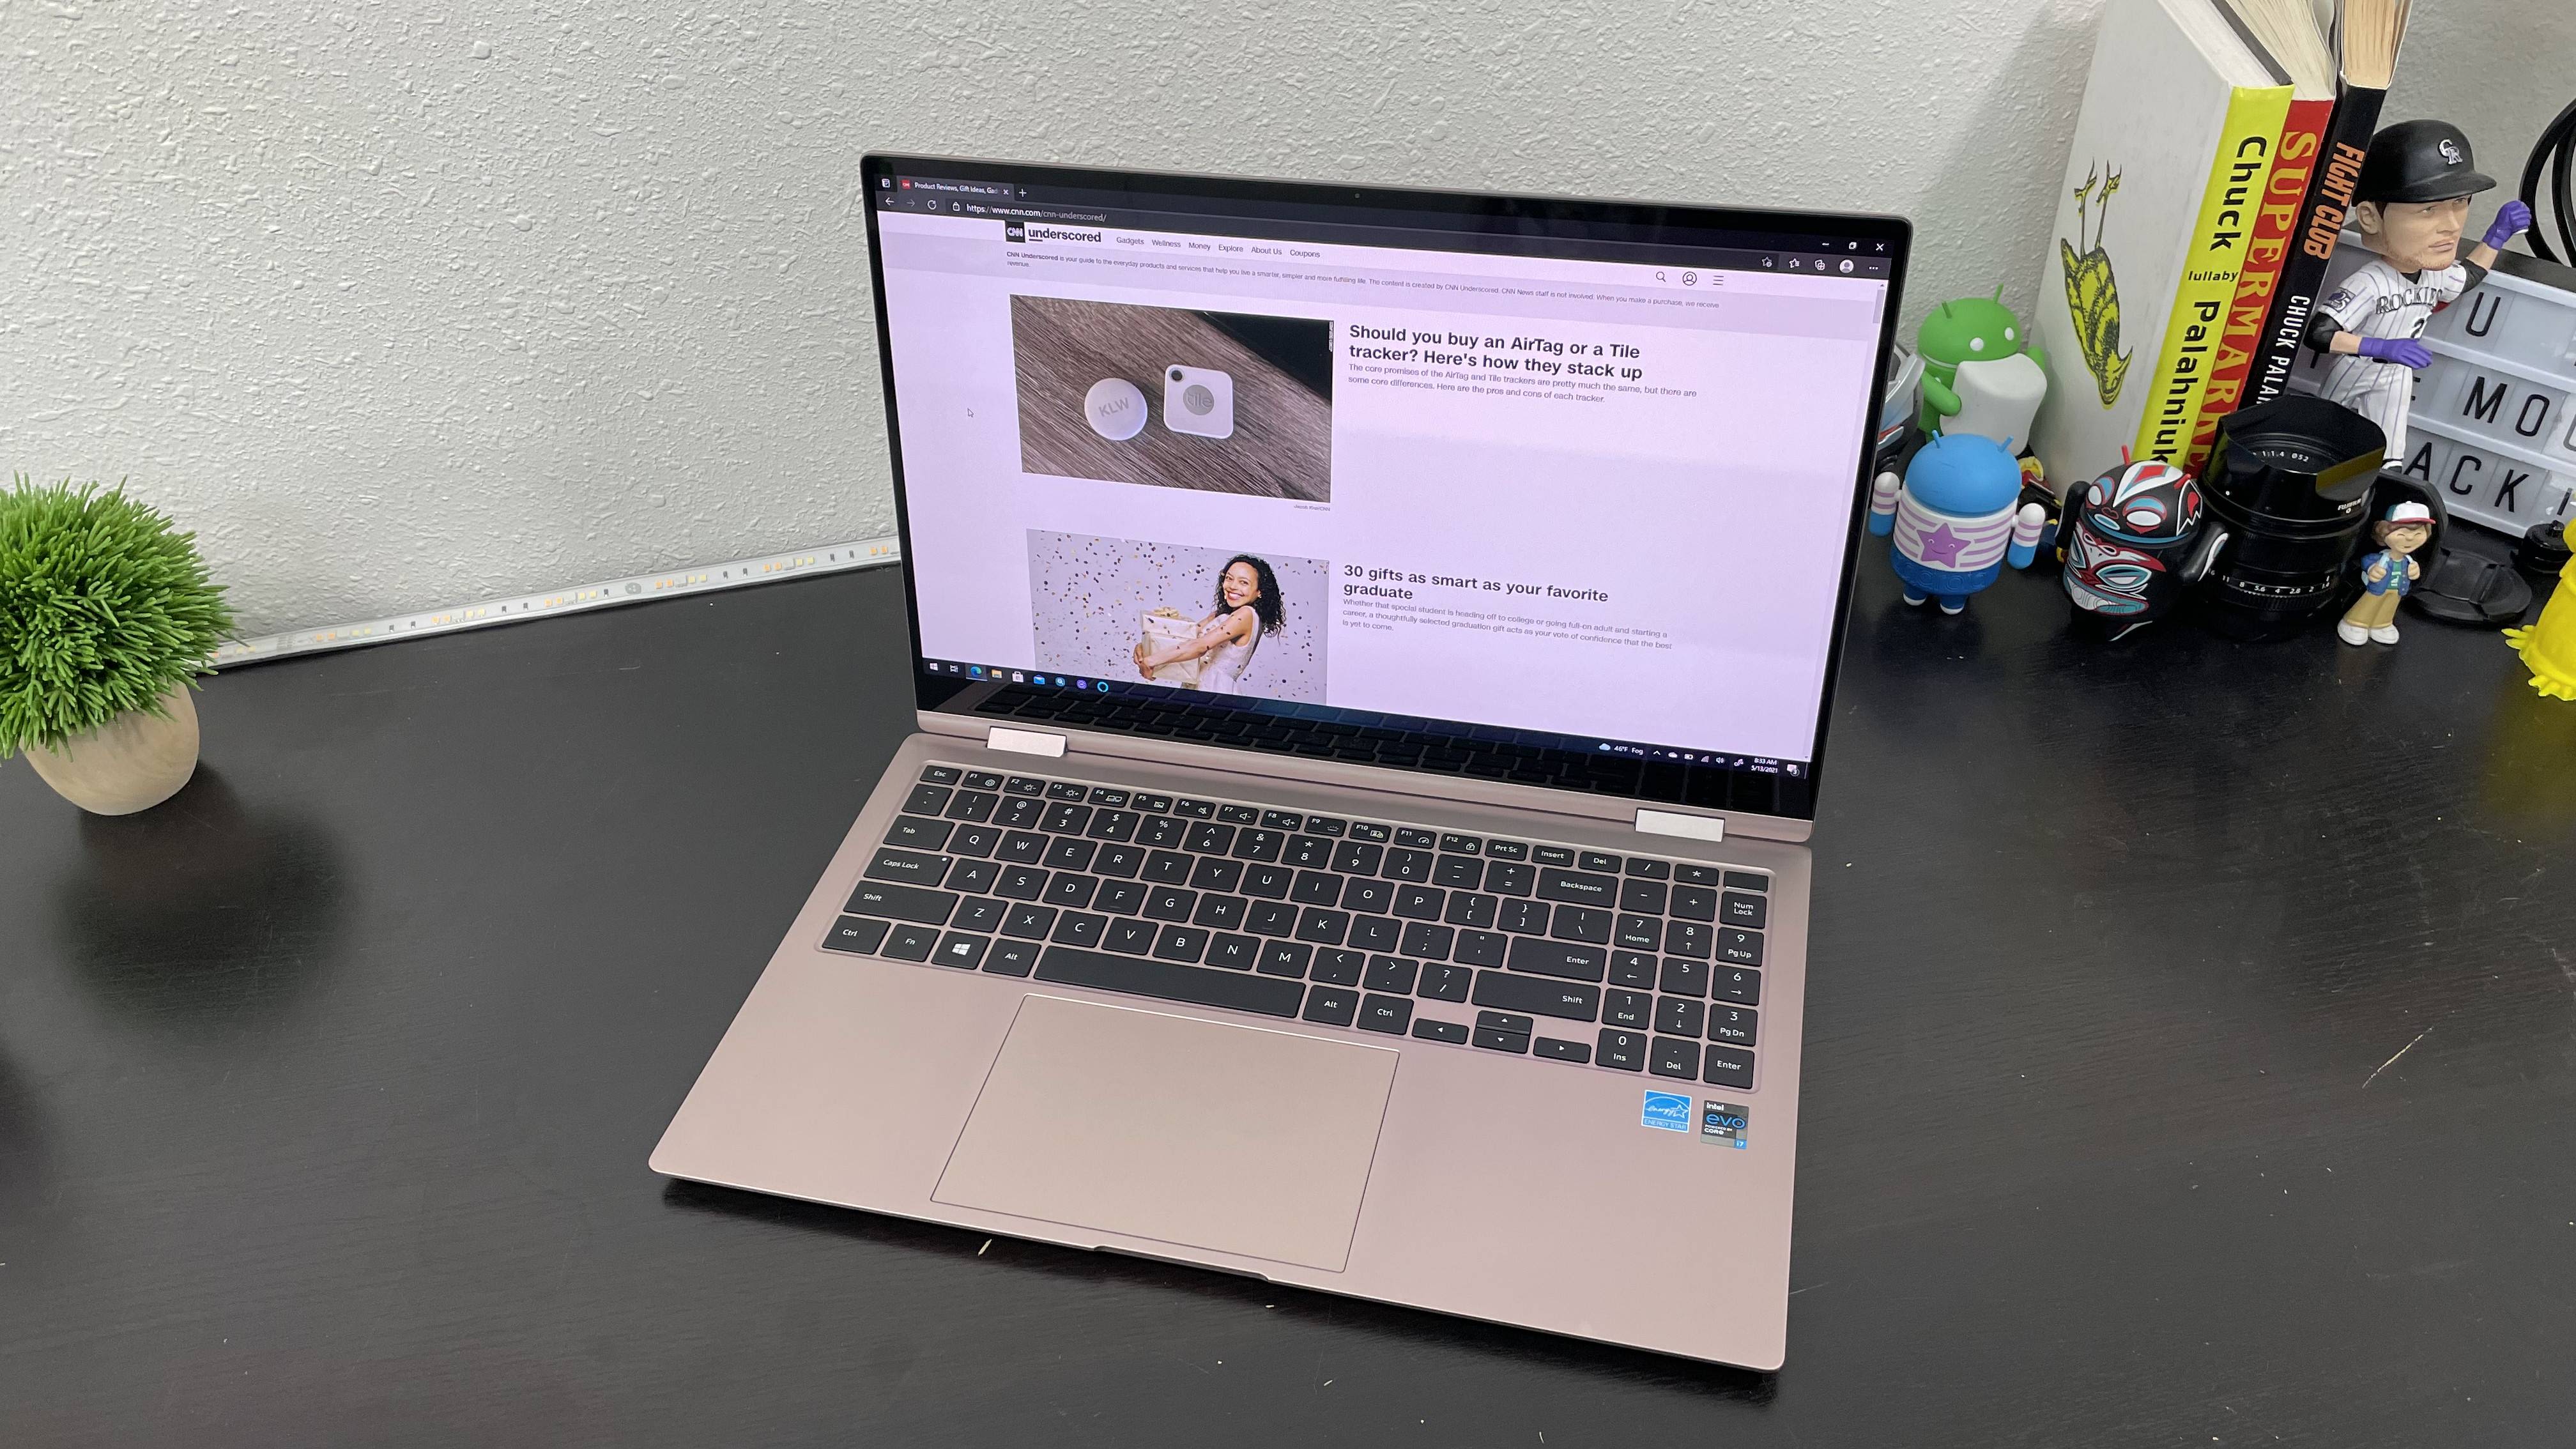 Samsung Galaxy Book Pro 360 review: A 2-in-1 that makes sense